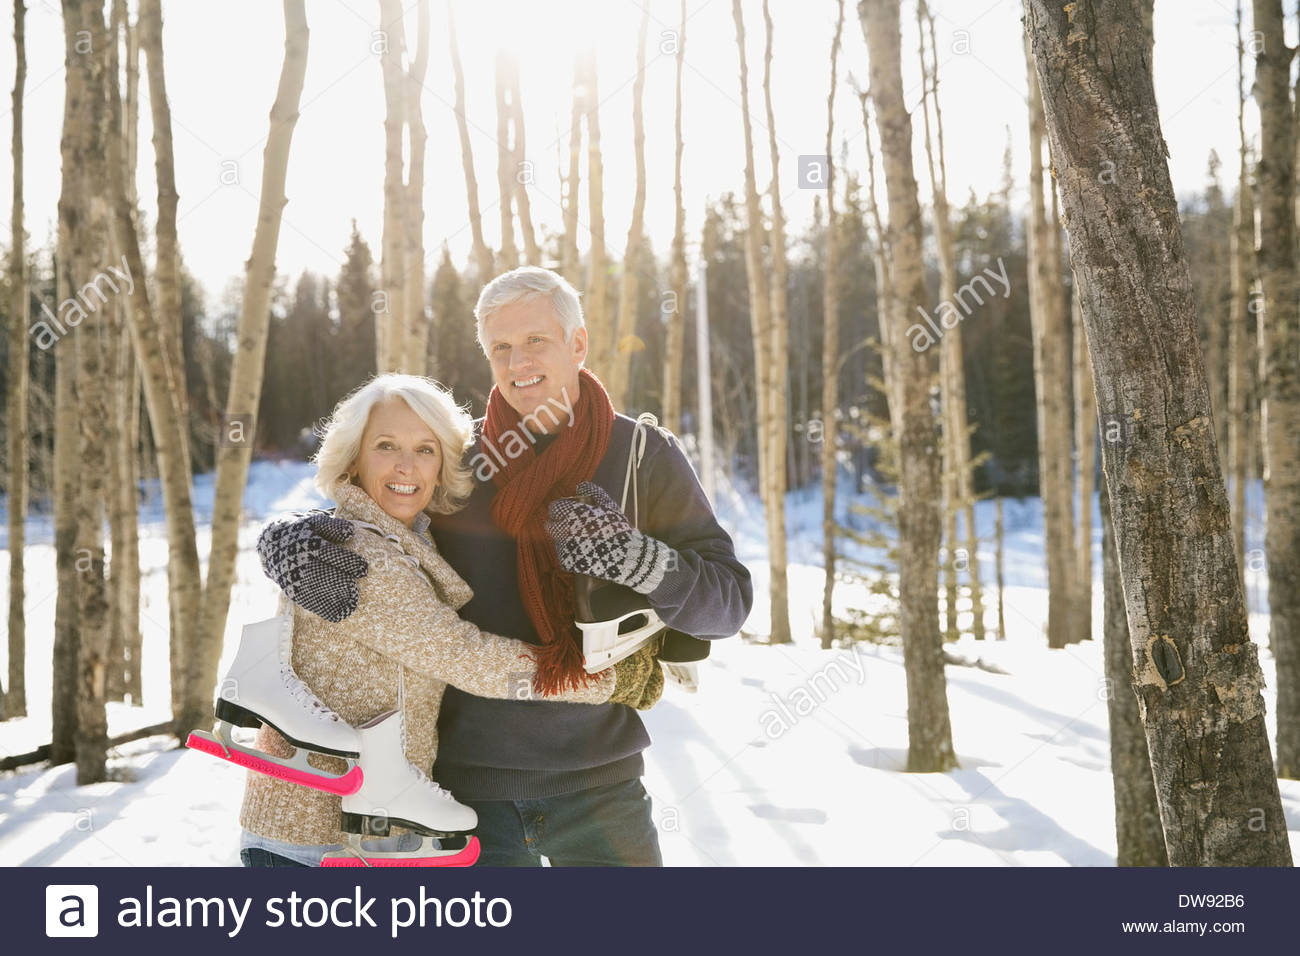 Affectionate couple walking through forest Banque D'Images